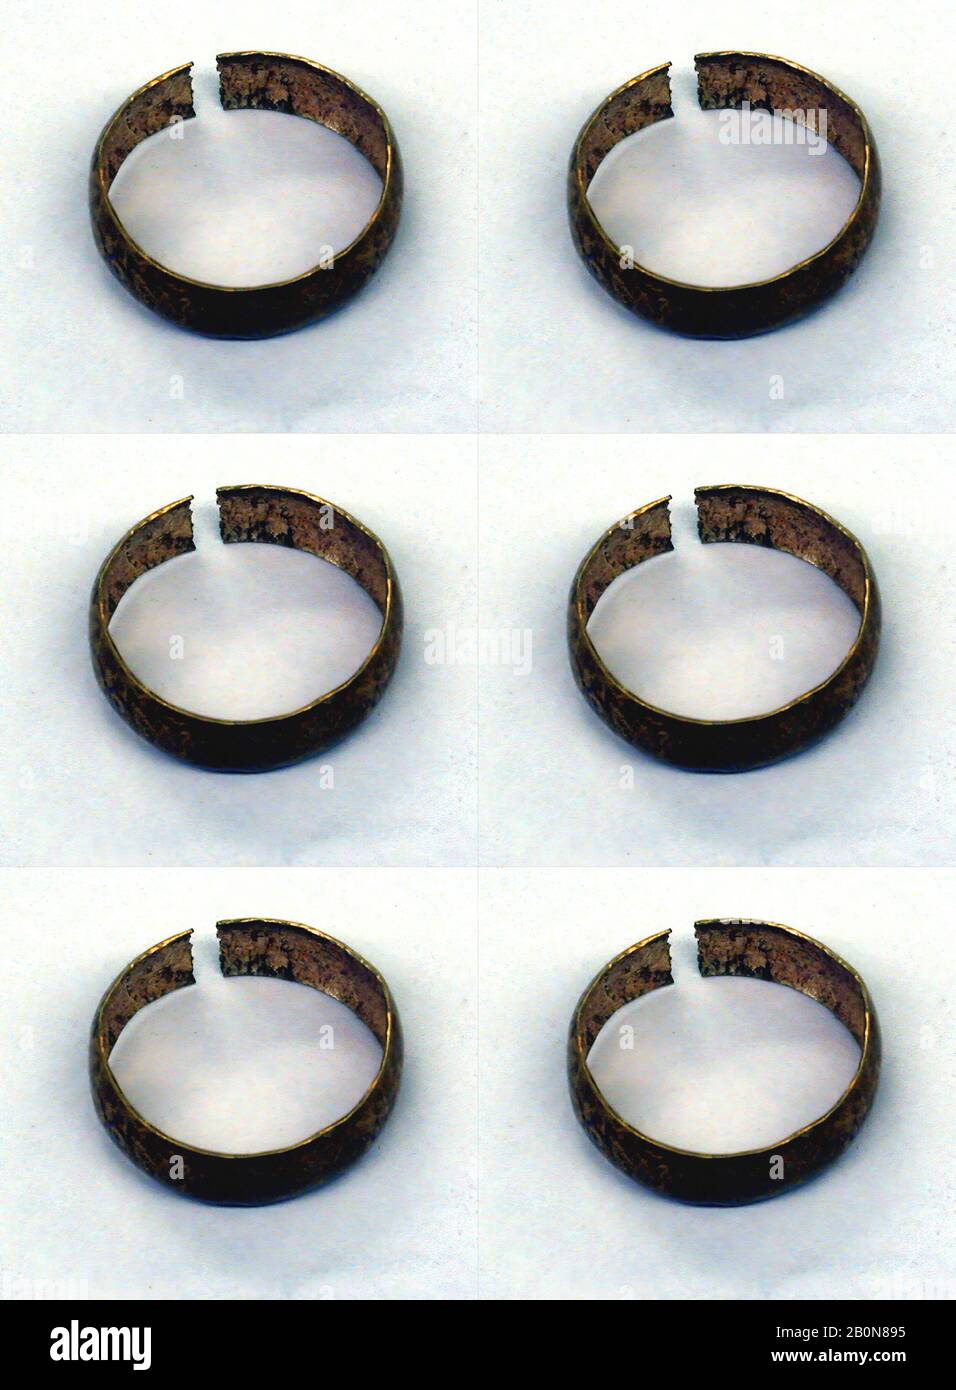 Ring, Visayes, 14th–15th century or earlier, Philippines, Visayes, Gold, Diameter 3/4 in., Metal-Ornaments Stock Photo